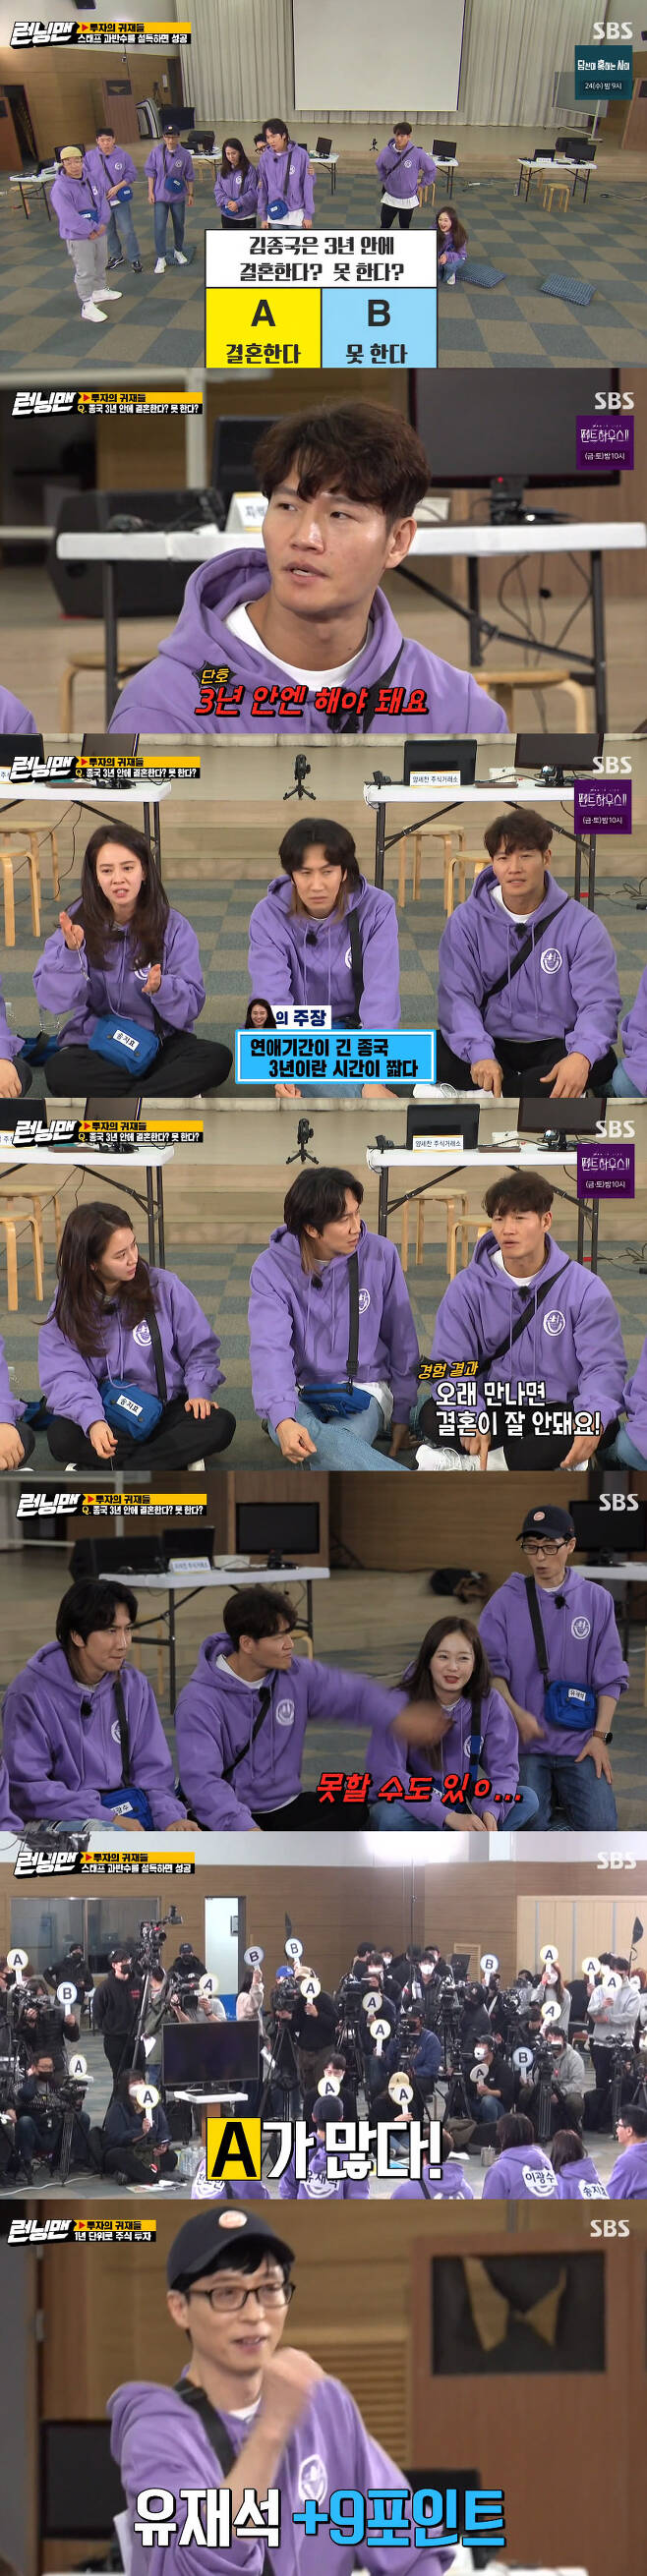 Running Man Yang Se-chan has become a super-sized Share Jolbu.On SBS Running Man broadcasted on the 21st, Running Man Simulation Investment Competition Race was held to select investment.On this day, the rule will pay 500,000 won for running money to all of them, and invest in the desired stocks, and the final amount of 1 and 2 will be punished.Investment will be conducted every year from 2011 to 2020, and mock investment will be made by adapting graphs of actual events.If you invest in predicting the stock price that changes every year, you will win the first and second prizes with the highest amount in 2020, 10 years later.On this day, the members invested every year since 2011.In 2011, Zurin Jeon So-min quietly made 328% high profit, while Share newborn Song Ji-hyo cut a third.In 2014, the stock market was up 150% for HBeauty.Yang Se-chan, Haha and Kim Jong-kook, who invested in Beauty, earned a lot of profits, while Ji Suk-jin, who changed from HBeauty, recorded a return on Zanbari.Lee Kwang-soo, who also gave up B-enter after listening to Ji Suk-jin, also kicked the ball.Currently, financial assets were ranked first, Yang Se-chan, second, Yoo Jae-Suk, third, Kim Jong-kook, fourth, Haha, fifth, Jeon So-min, sixth, Ji Suk-jin, seventh, Song Ji-hyo, and eighth.In addition, Kim Jong-kook had a heated debate on the theme of Kim Jong-kook is married in three years? Can not you get information on the rising stock price?Kim Jong-kook said after Choices on Im getting married in three years, I have to do it in three years.Song Ji-hyo, who says, I can not marry in three years, said, My brother has a long love life.Three years is short, but Kim Jong-kook said, Experience results show that marriage is not good if you meet for a long time. Jeon So-min, who heard this, said, I can not ... and Kim Jong-kook laughed at the speed of light by silenced Jeon So-min.The results of the staff Choices were married in three years, and the members who met them were confirmed by three points.Meanwhile, Yang Se-chan, who gained FVaio share price information on the information exchange, leaked false information to EVaio to the members, and Yoo Jae-Suk and Lee Kwang-soo invested heavily in the words of Yang Se-chan.Stock markets in 2015 saw EVaio rise 1100% and FVaio 500%.Ji Suk-jin, who conducted the Vaio Malbun operation, recorded a 772% increase, and Yang Se-chan, who was also in FVaio, exceeded 450,000 won.Even after that, members were sold to EVaio through the first stage stock price information, but EVaio fell 50% in 2016.On the other hand, Yang Se-chan and Ji Suk-jins G food rose 25%, especially Yang Se-chan, as a super-size Share sleeper.